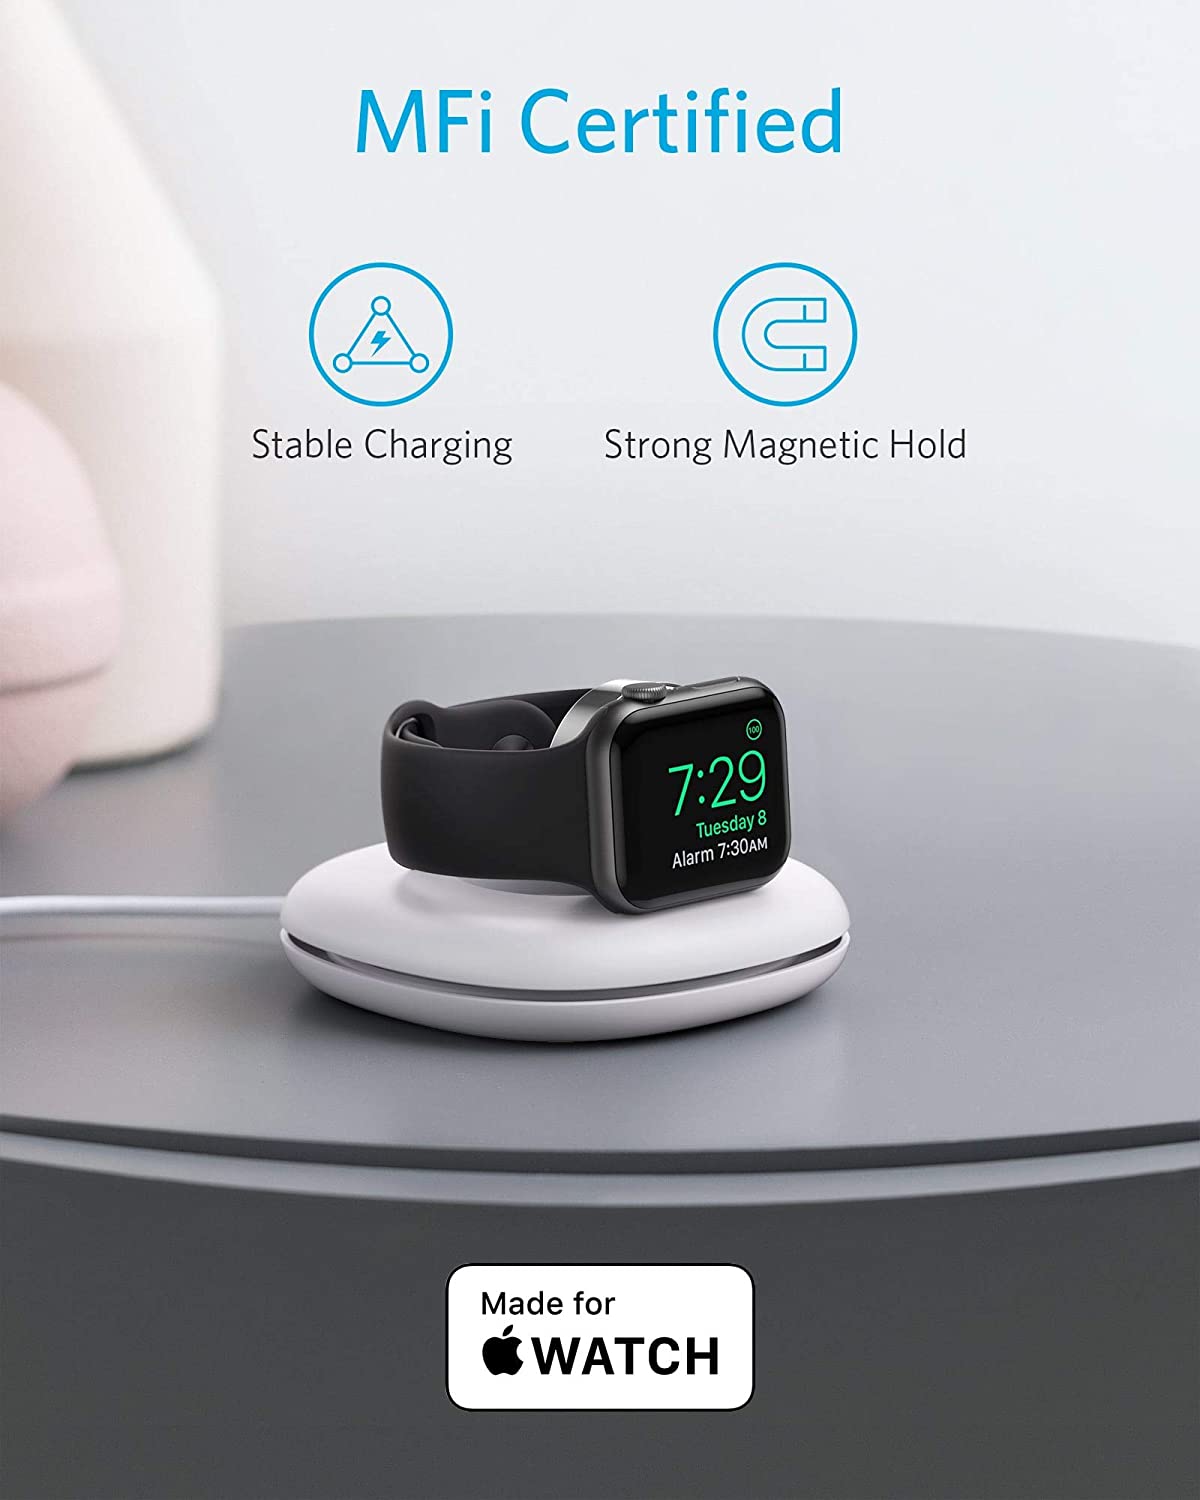 Bakeey-Foldable-Wireless-Charger-Charging-Dock-for-Apple-Watch-with-USB-C-Connector-MFi-Certified-fo-1853200-5